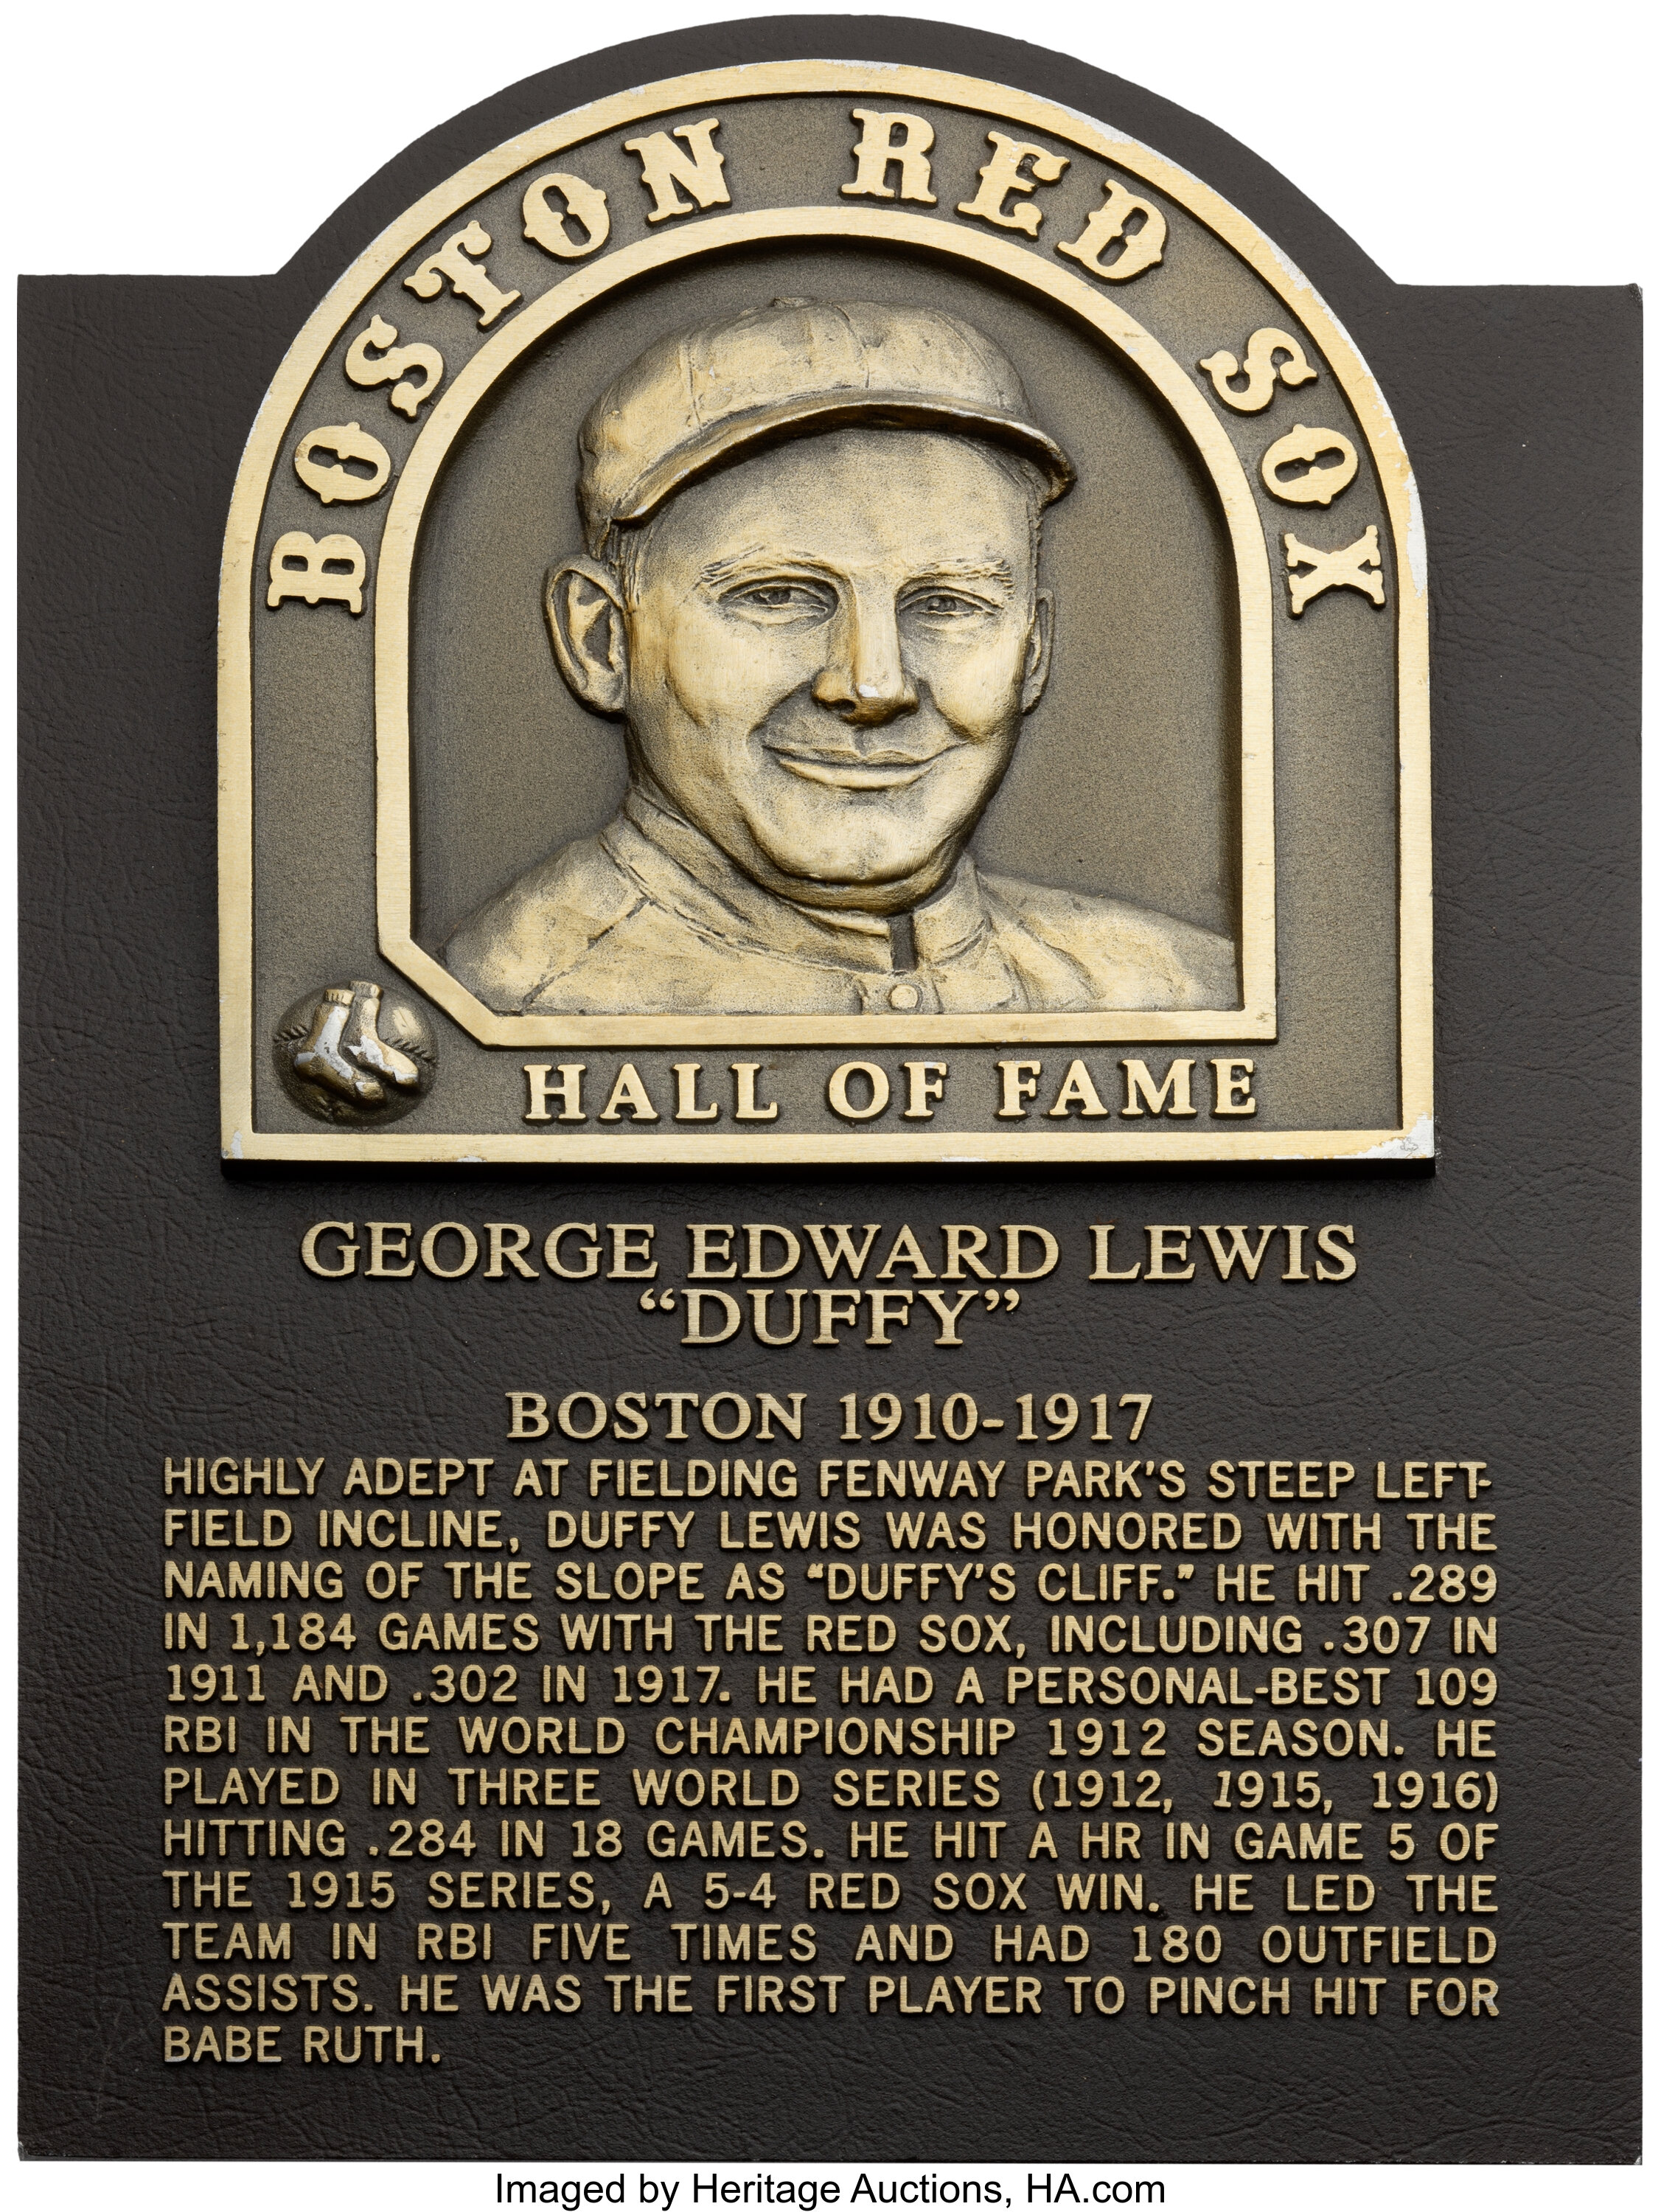 2002 George Duffy Lewis Boston Red Sox Hall of Fame Player, Lot #81172